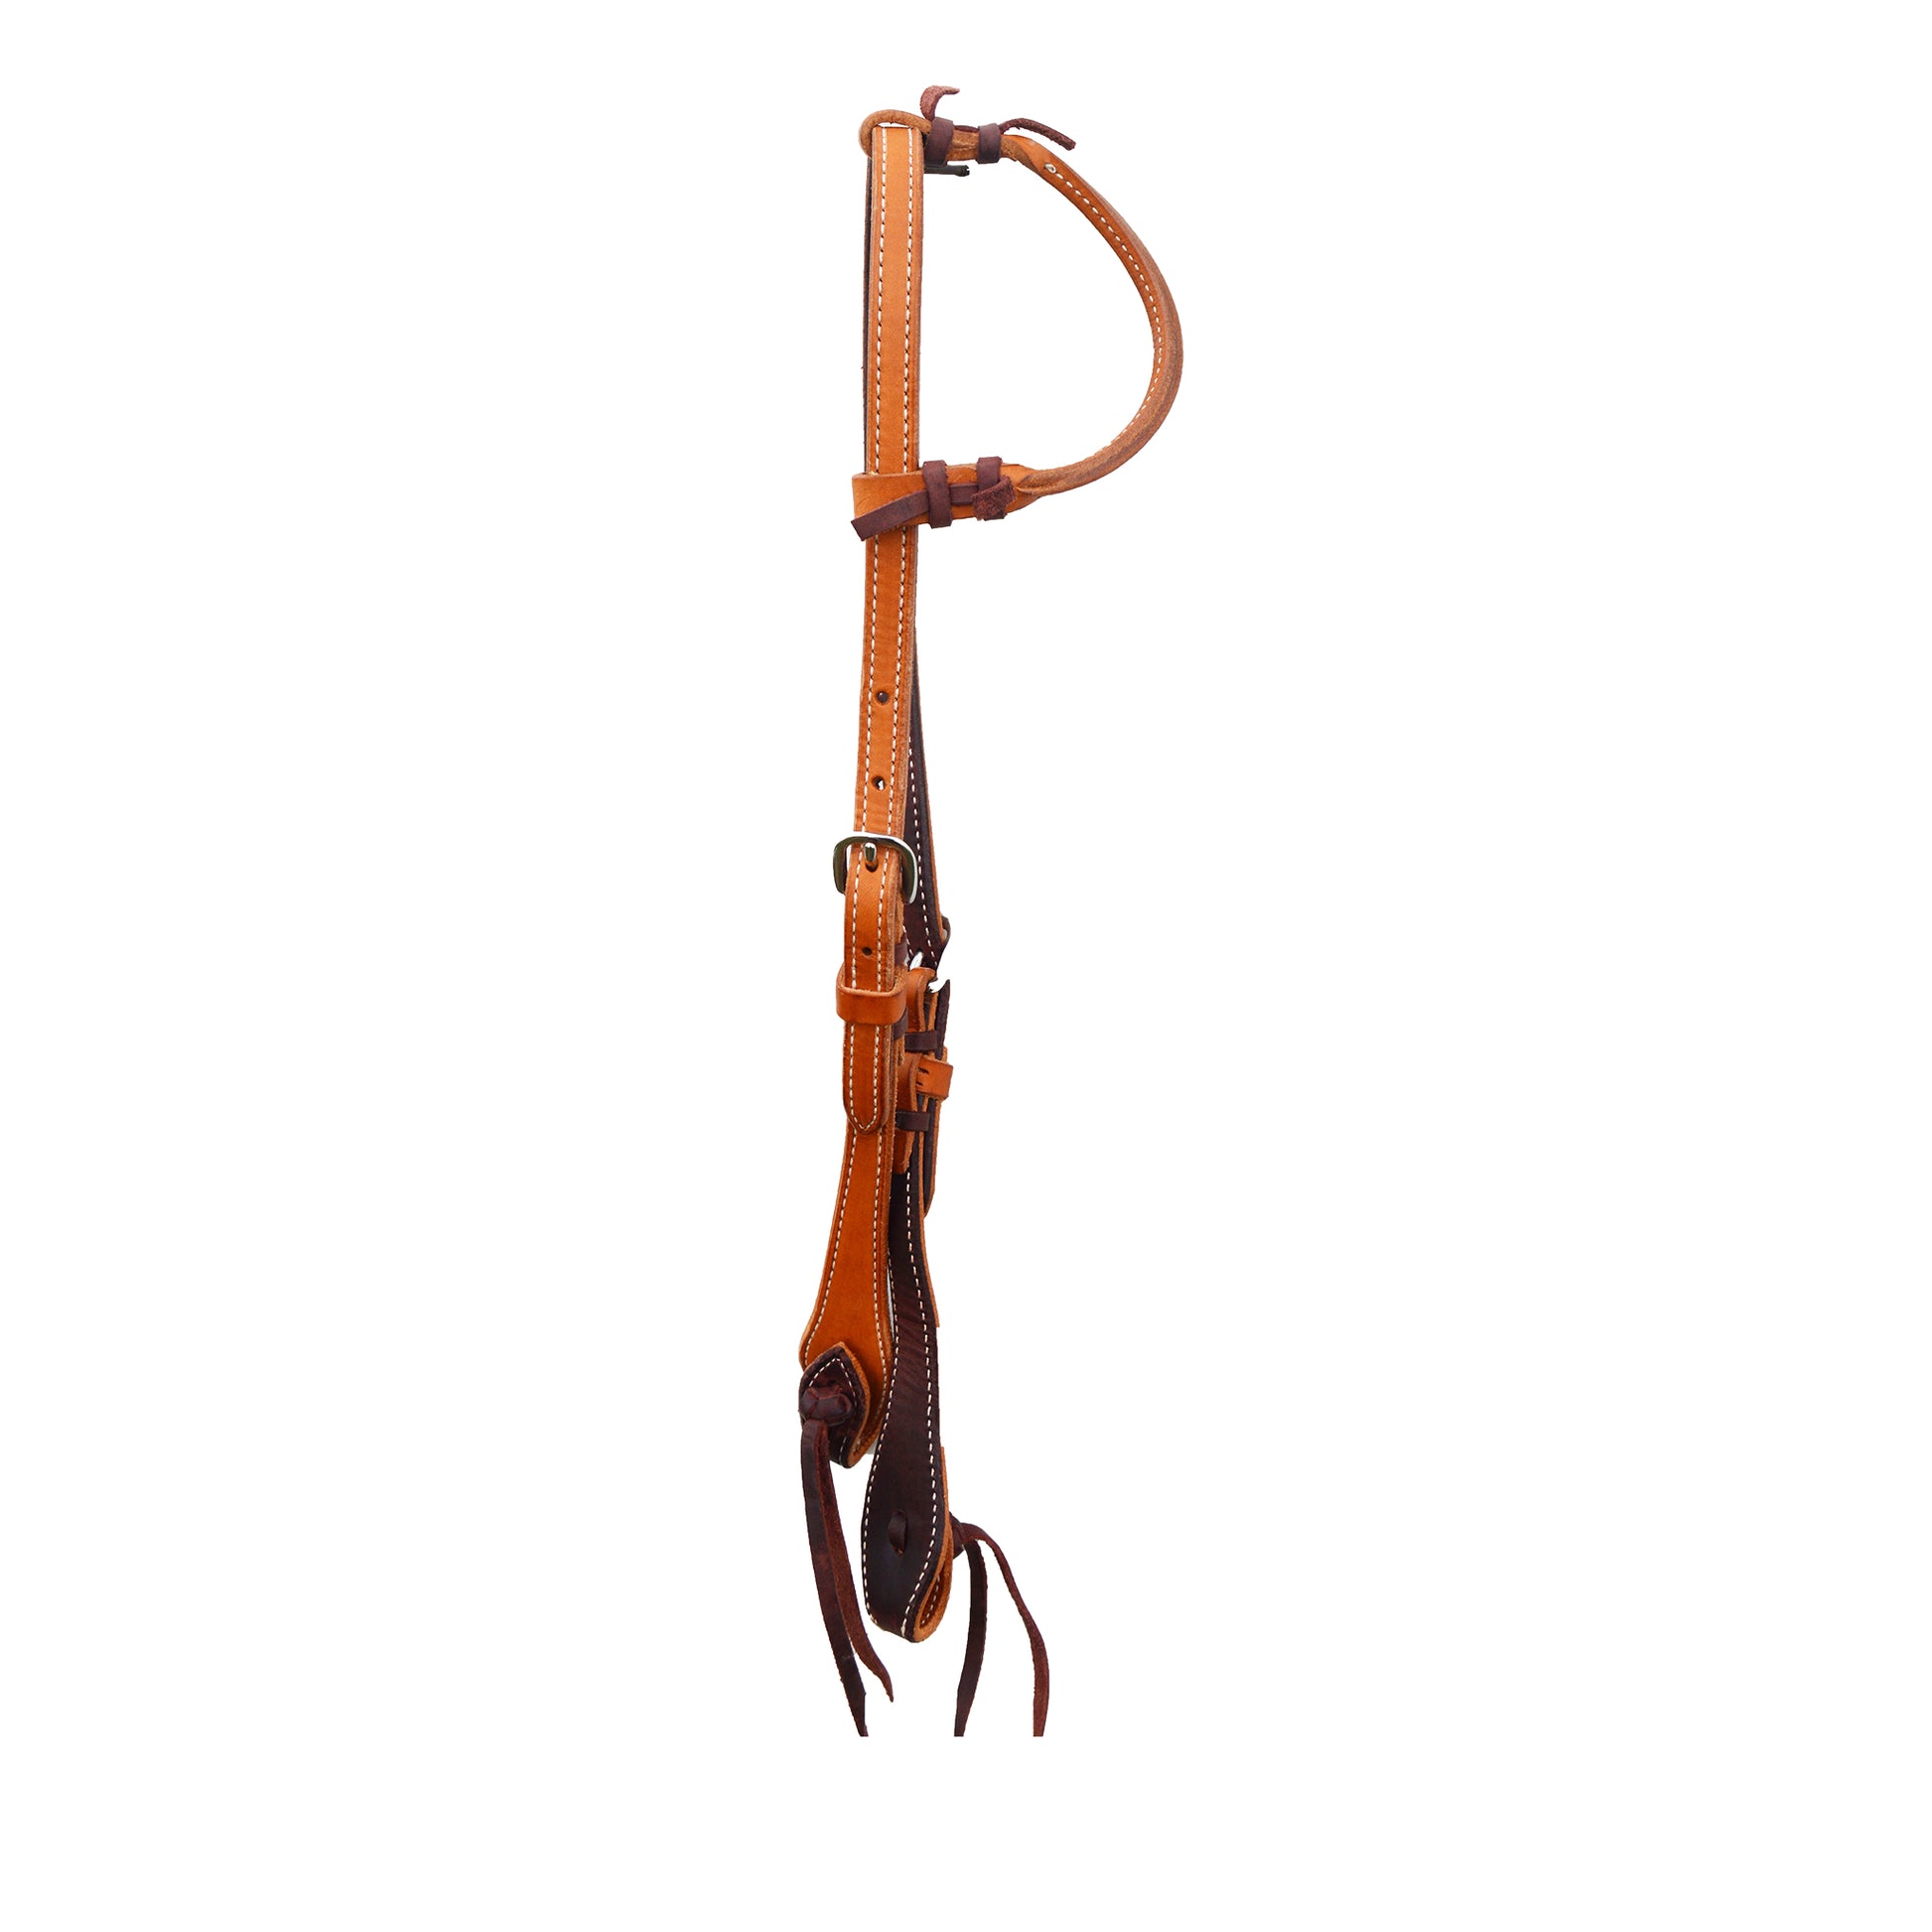 Elite round one ear headstall harness leather dual cheek adjustments with pineapple knot.